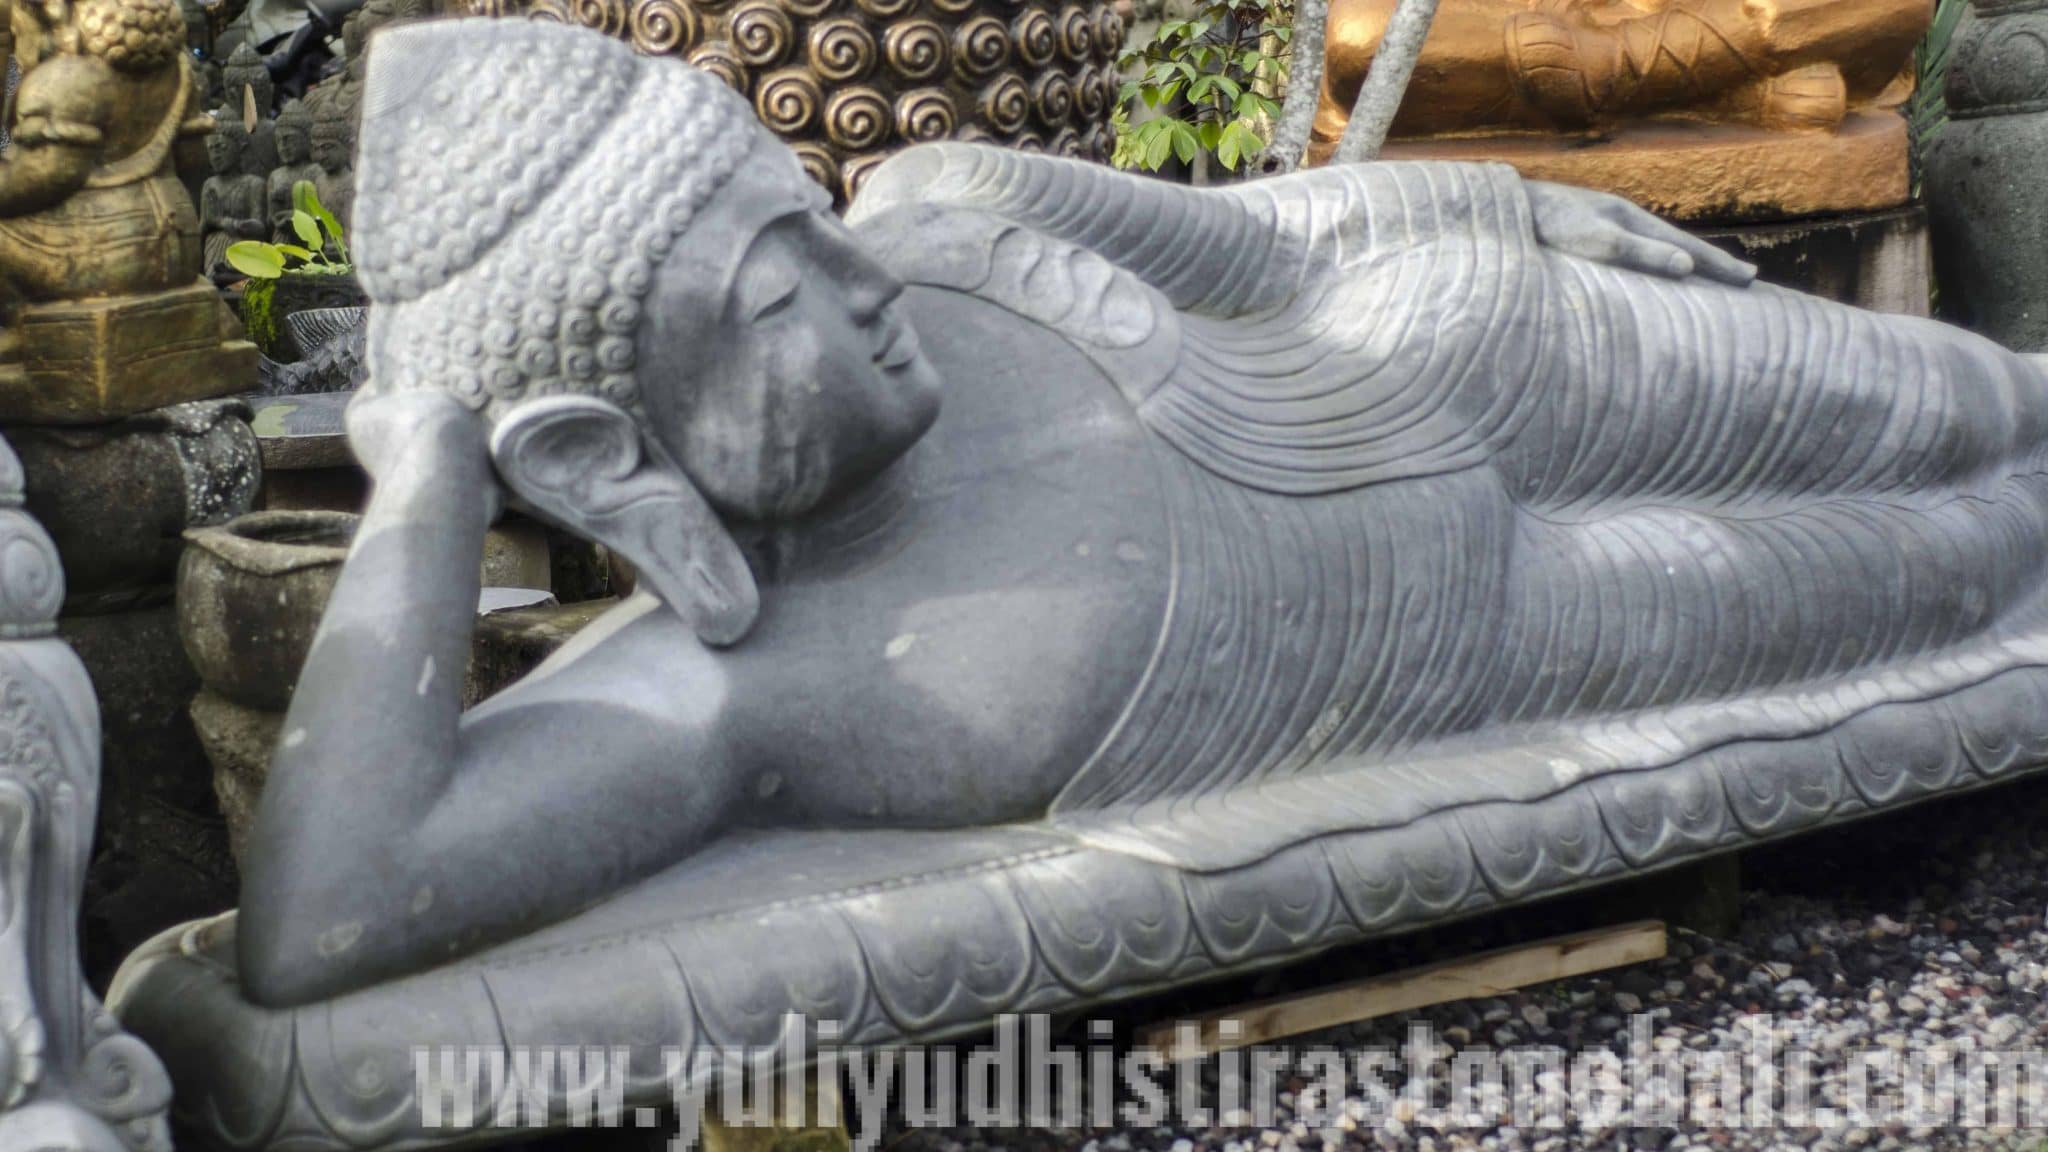 Stone Carving in Bali: The Best Quality and Ready to Export